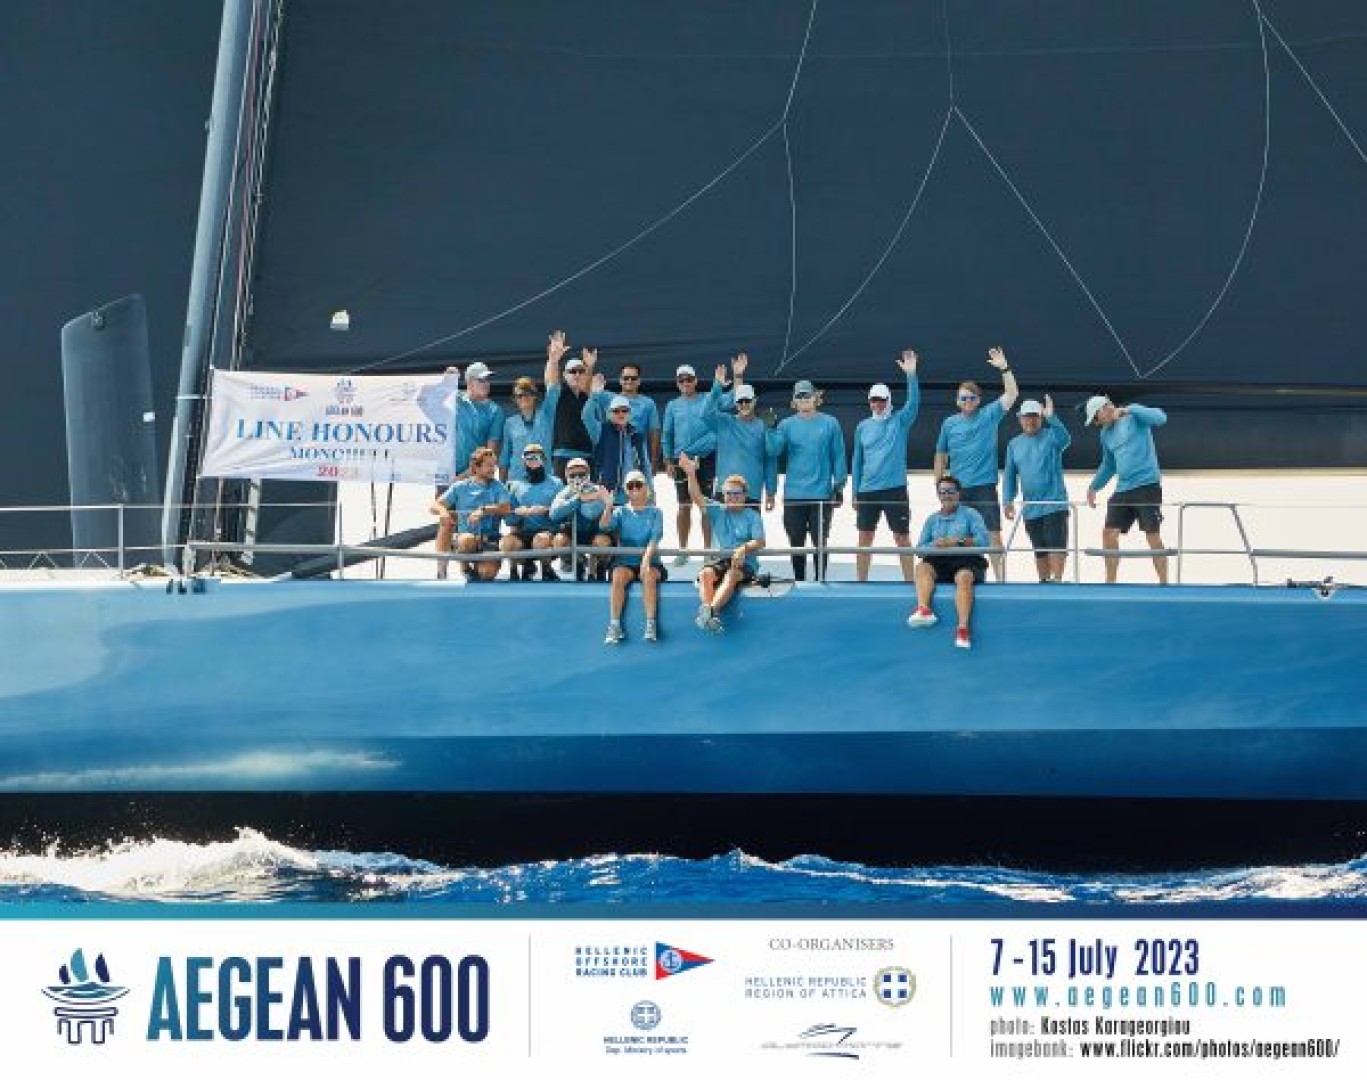 Course record smashed at the AEGEAN 600